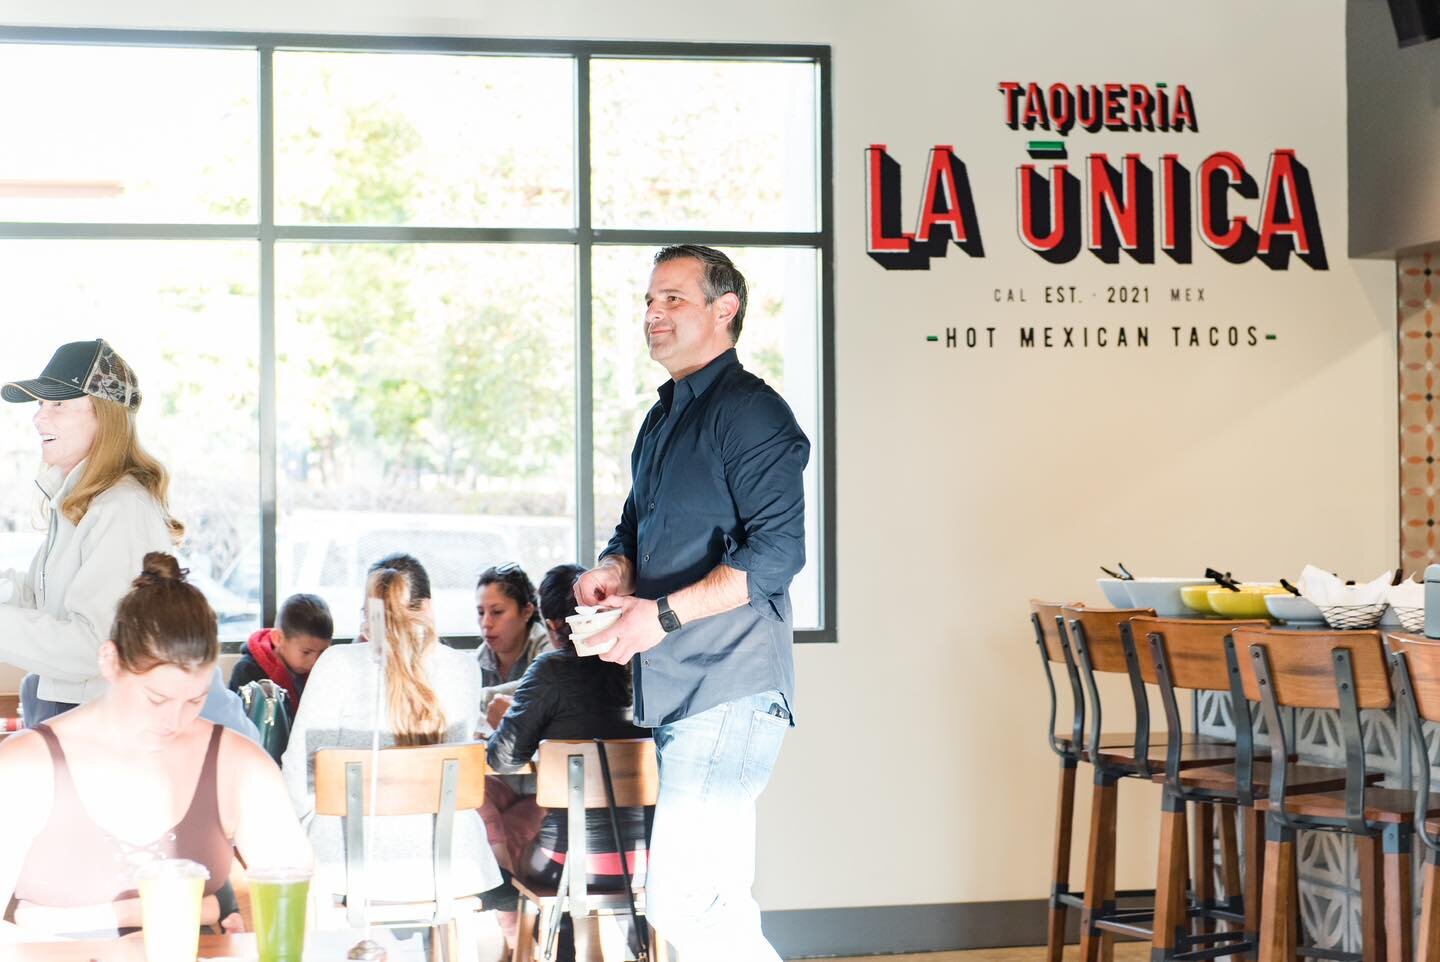 Here&rsquo;s hoping your weekend plans include a visit to Taqueria La Unica!😎🌮

📷@kinglu_ 

#taquerialaunica #tacolover #tacos #mexicanfood #comidamexicana #weekend